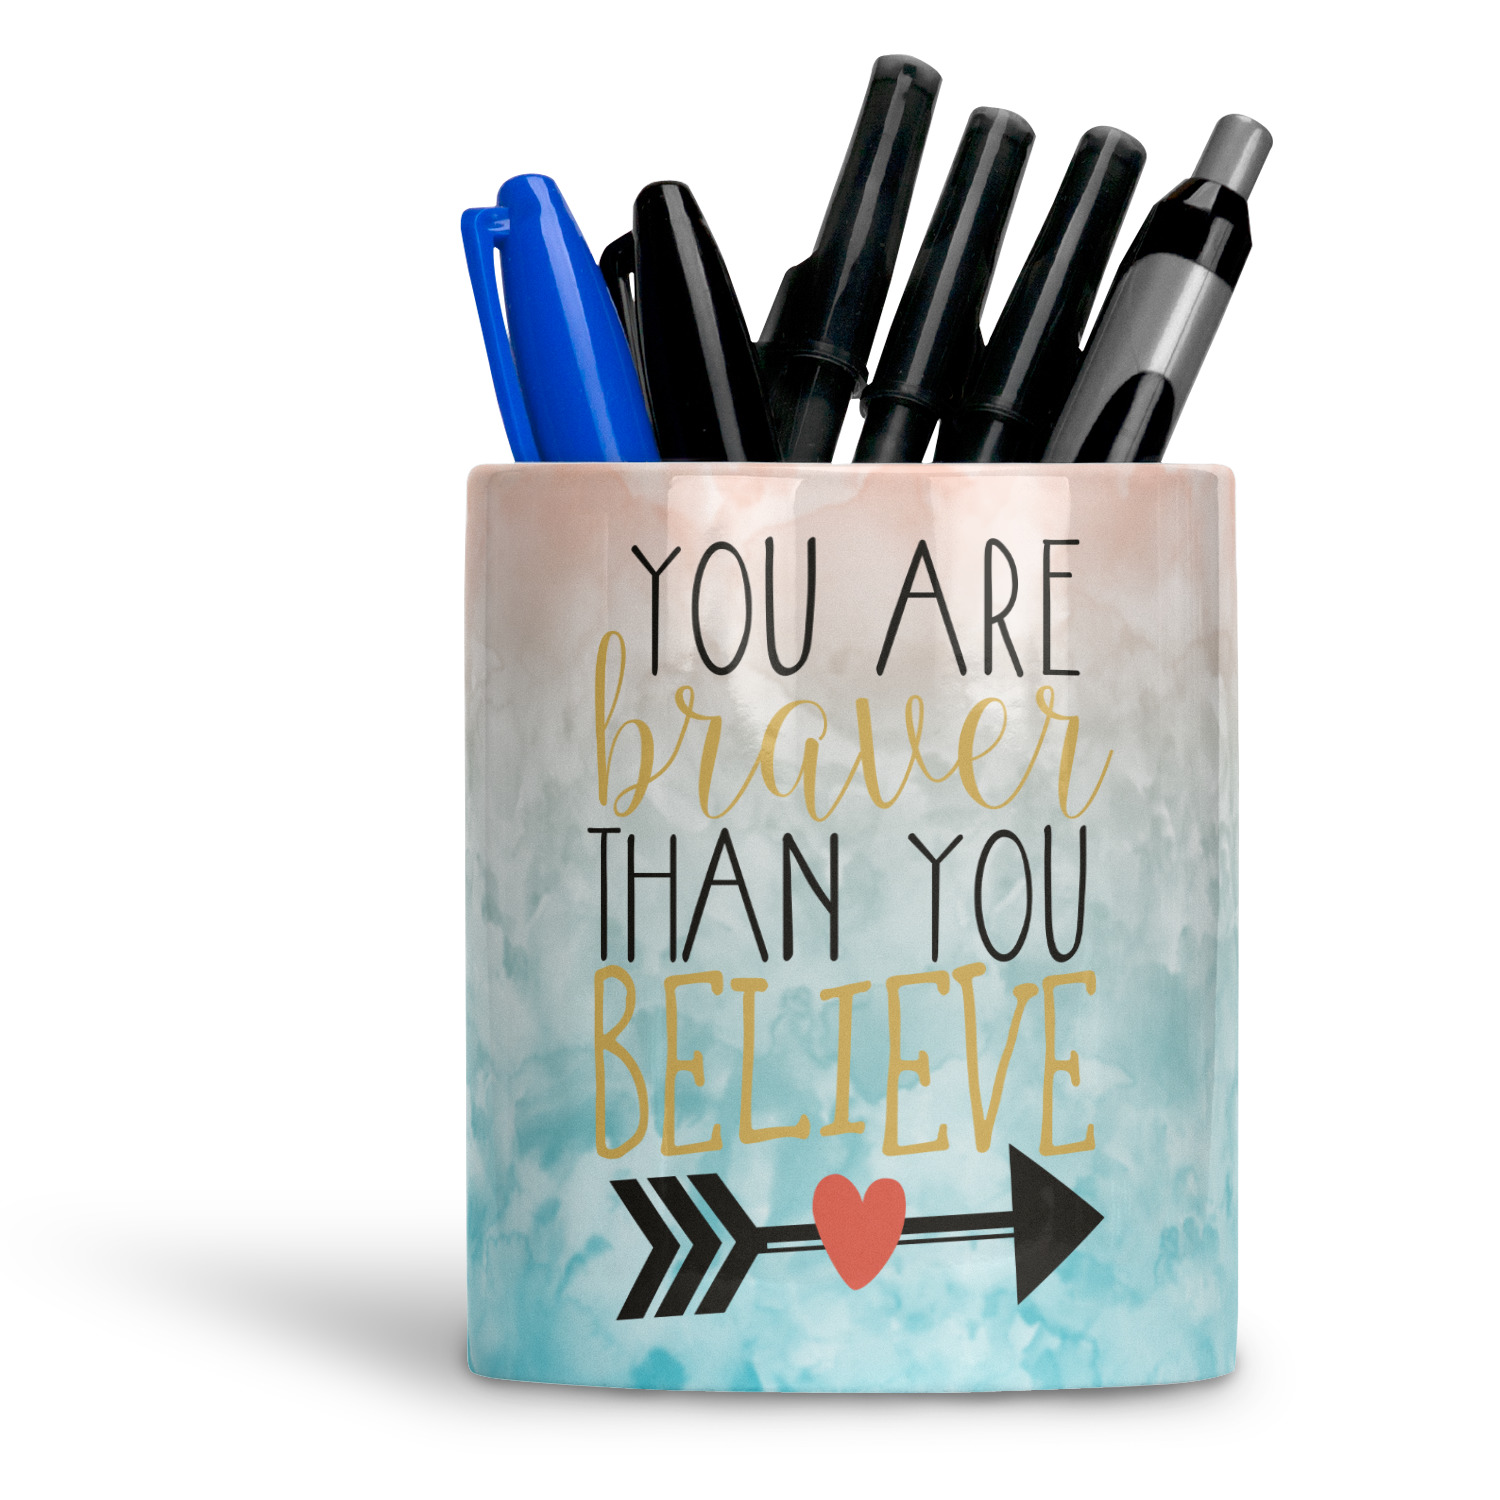 Totem Quote 20 Blue Pens|Gifts for Stylish Girls|Fragrance/Scented/Aromatic  Ink Pens|Cute Emoji Themed Pastel Body Colours| 0.7 mm Tip|Smooth Writing| Pens for Writing|Cute Aesthetic Ball Pens : Amazon.in: Office Products